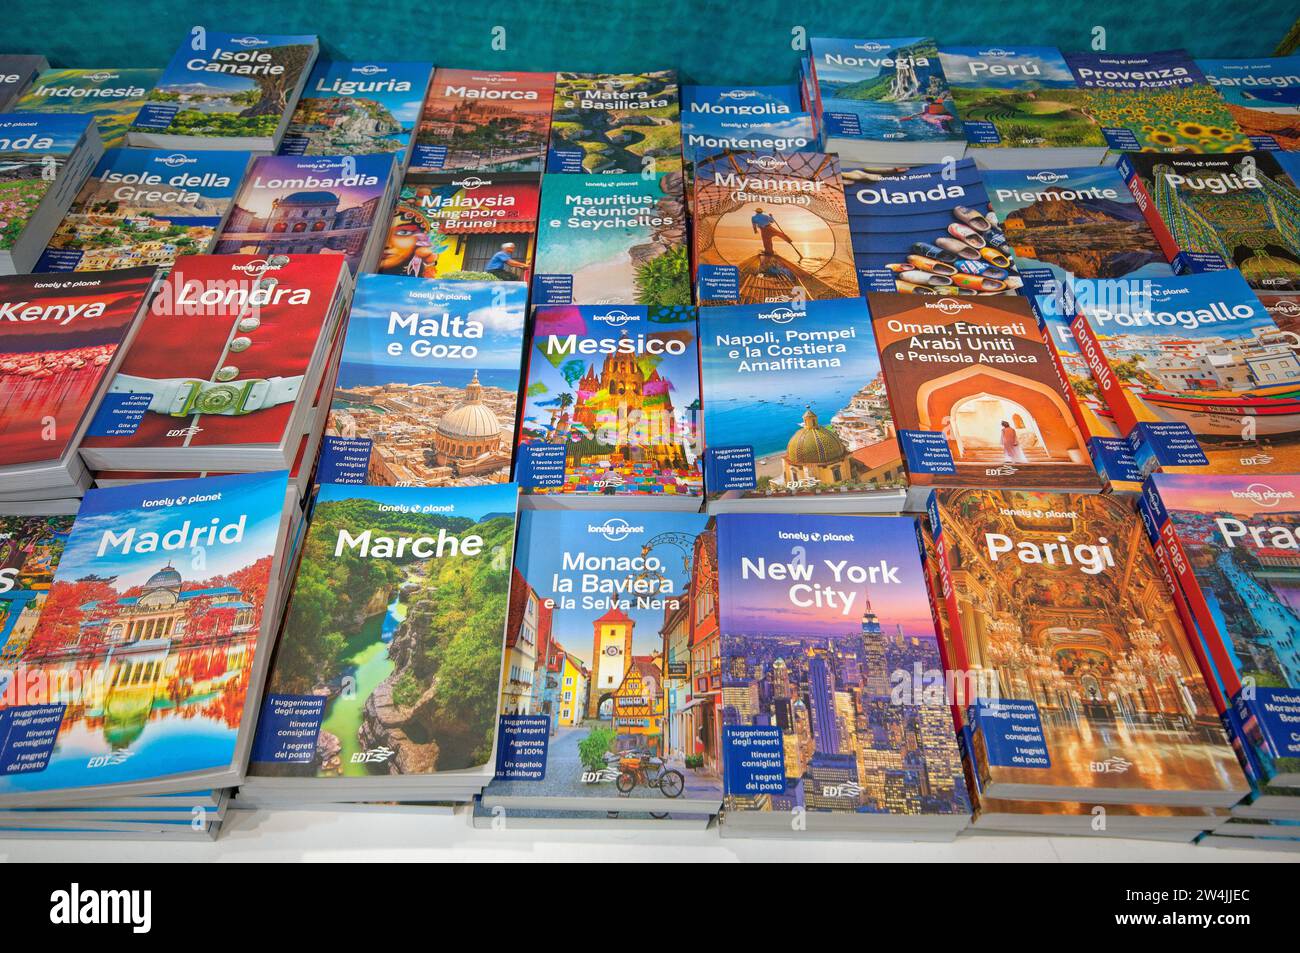 Buy Kerala (Lonely Planet Travel Guides) Book Online at Low Prices